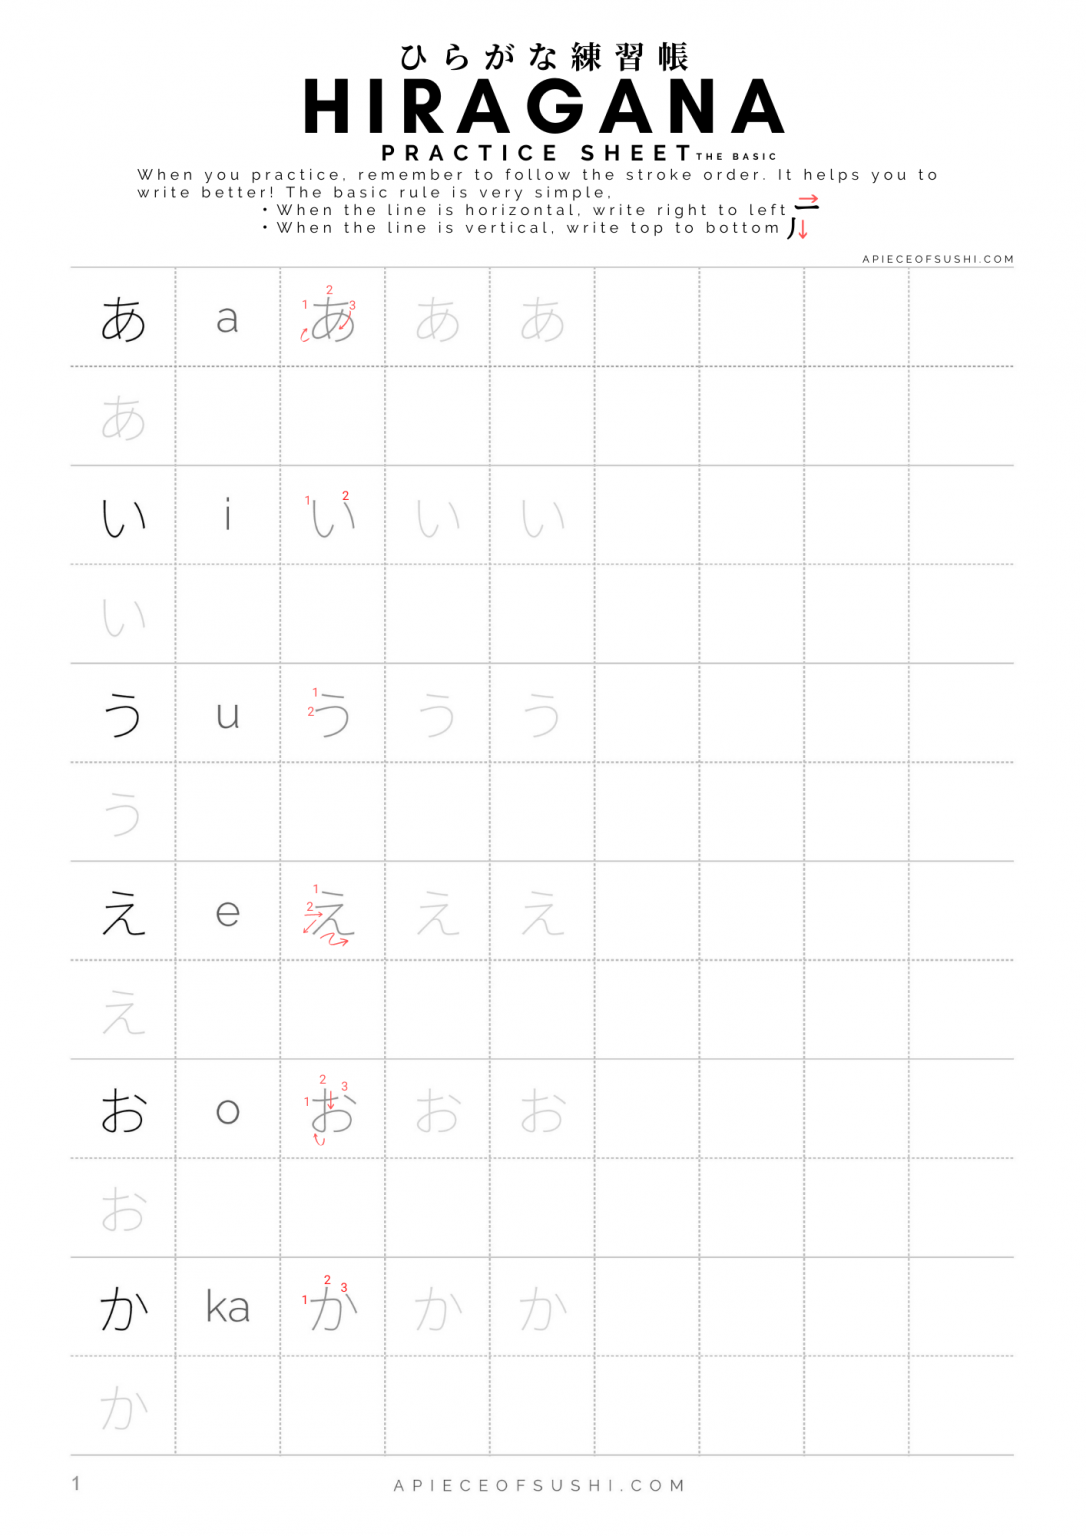 hiragana-practice-sheet-free-download-7-pages-workbook-printable-pdf-a-piece-of-sushi